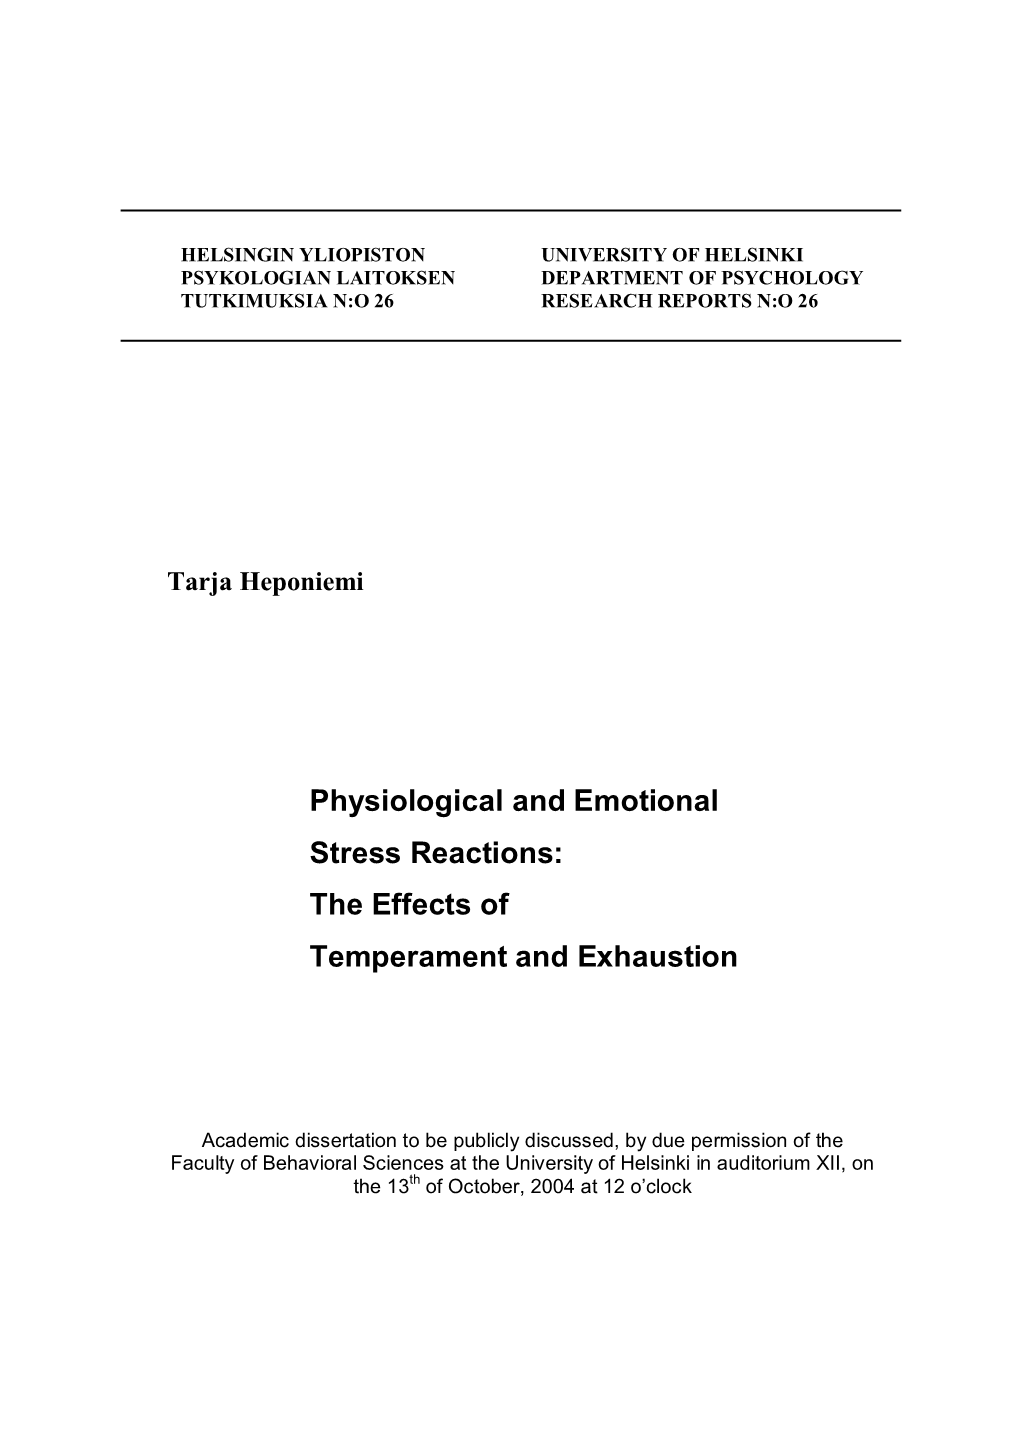 Physiological and Emotional Stress Reactions: the Effects of Temperament and Exhaustion